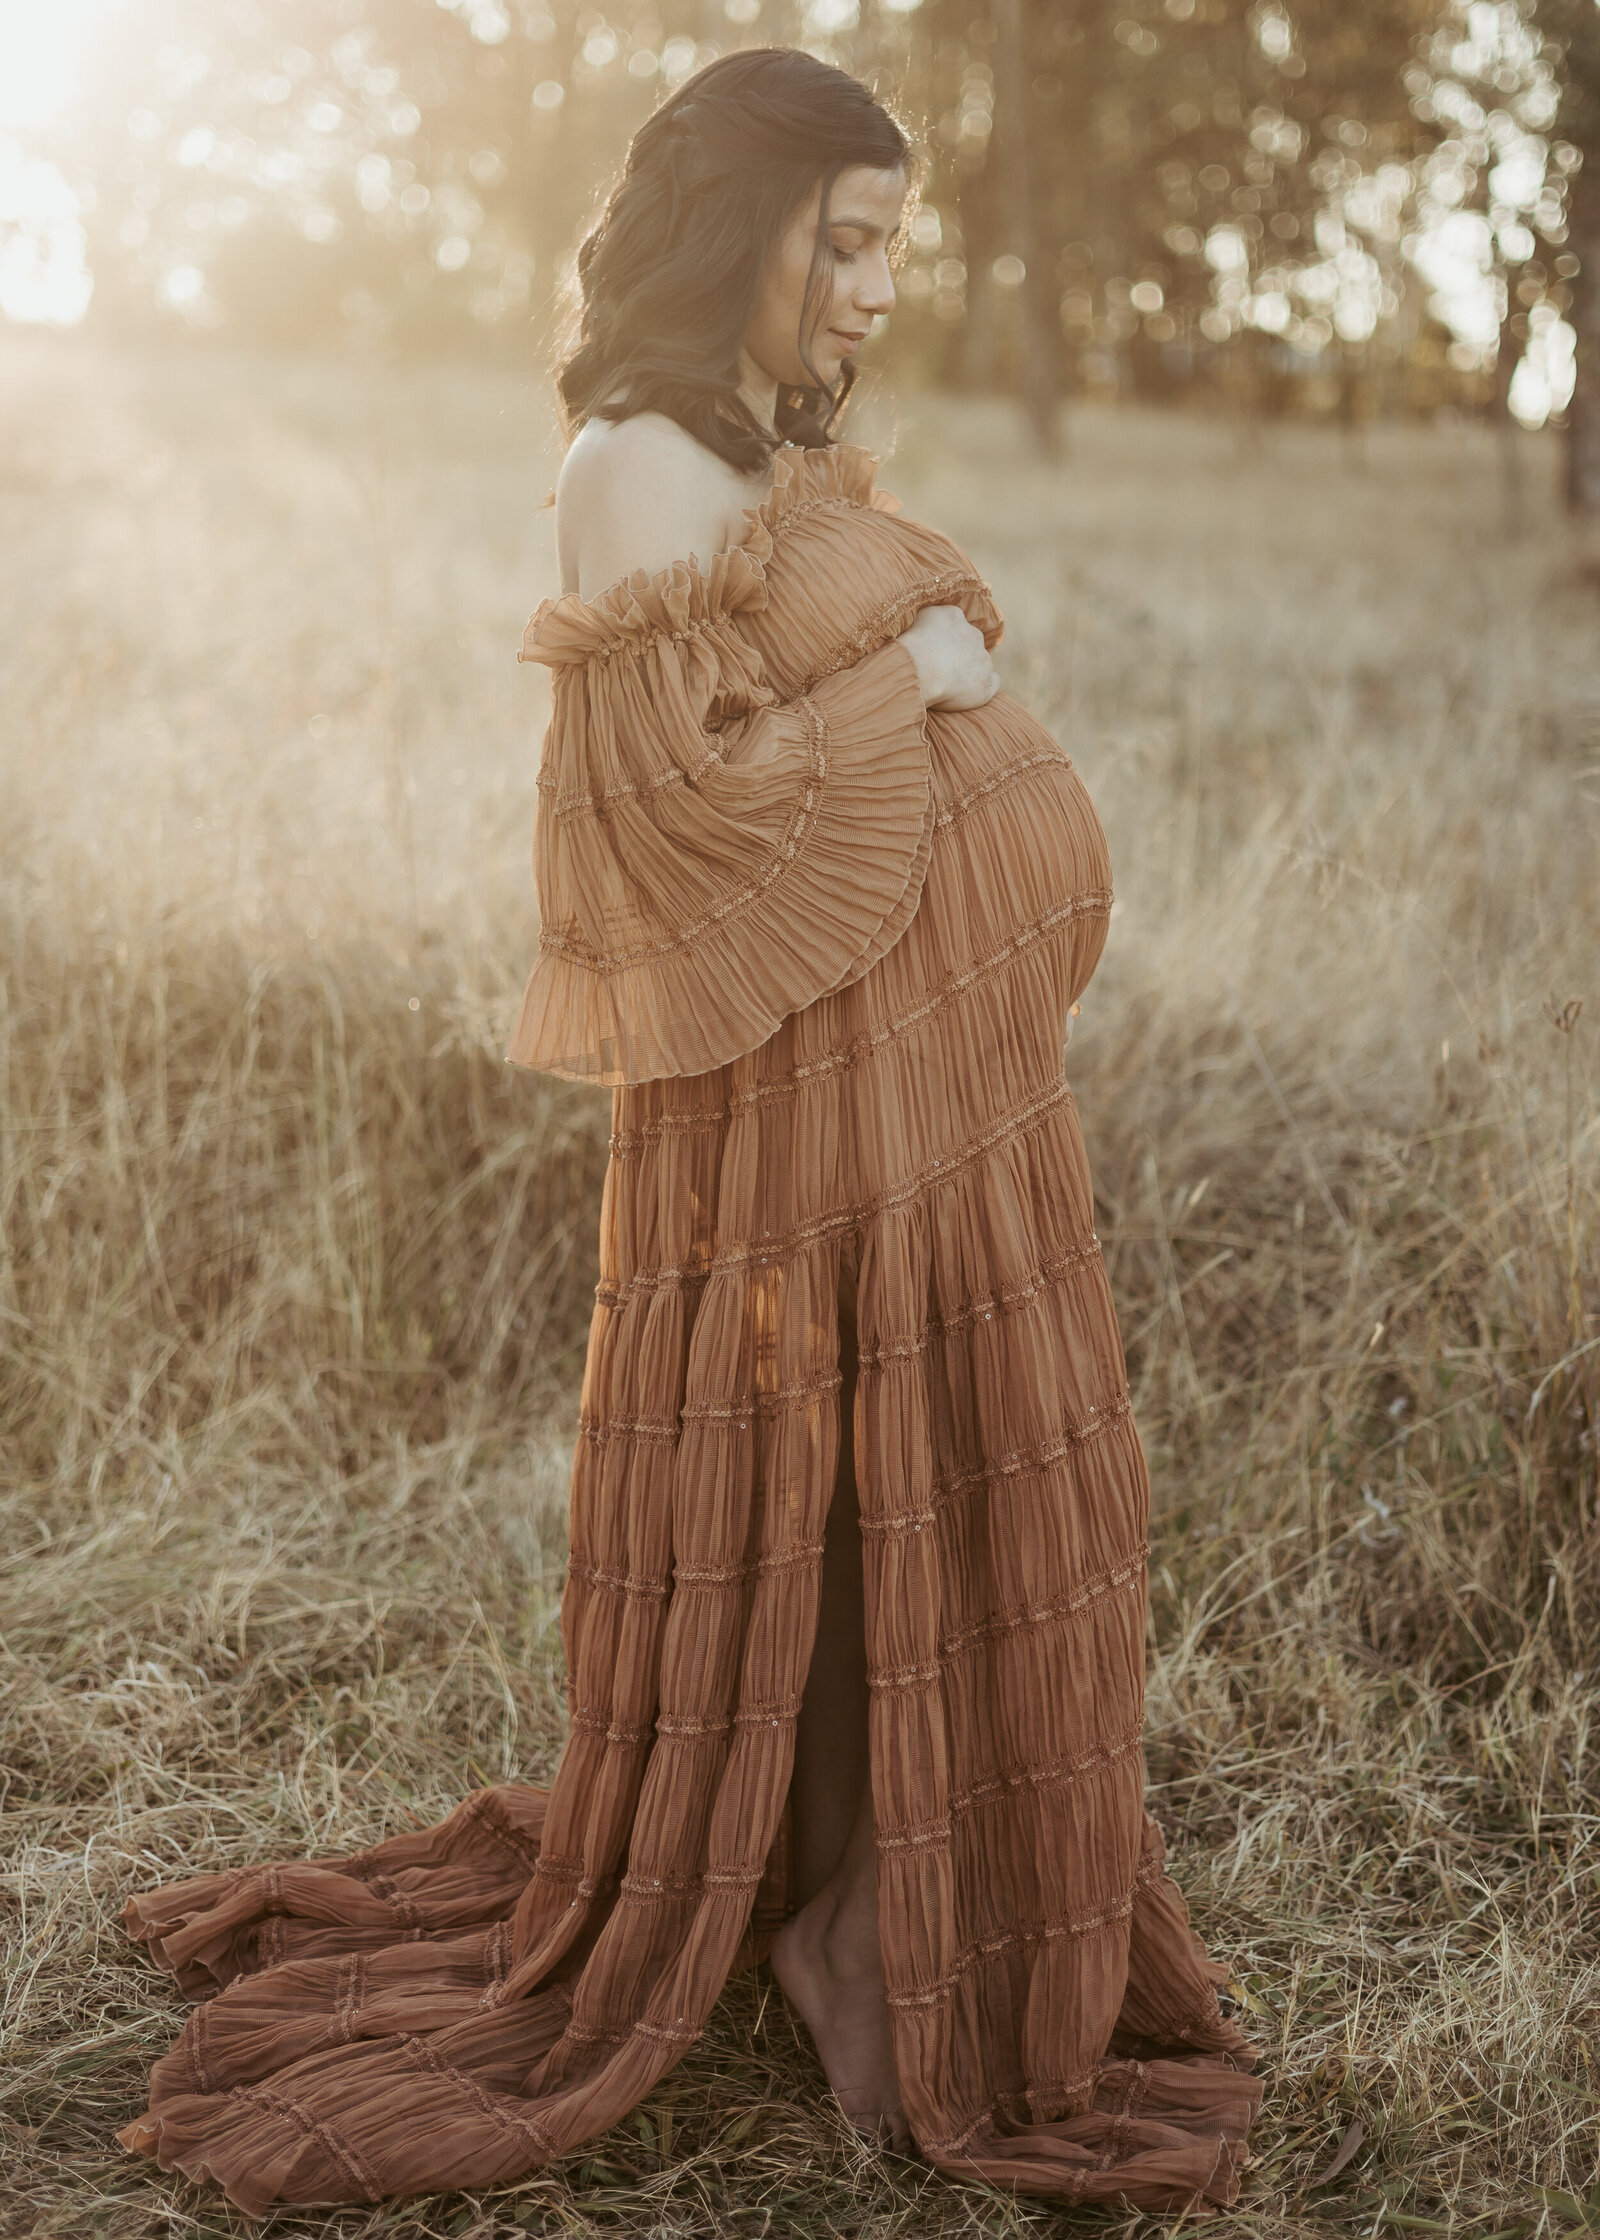 First time mum wearing a beautiful long brown dress in a grassy field at sunset